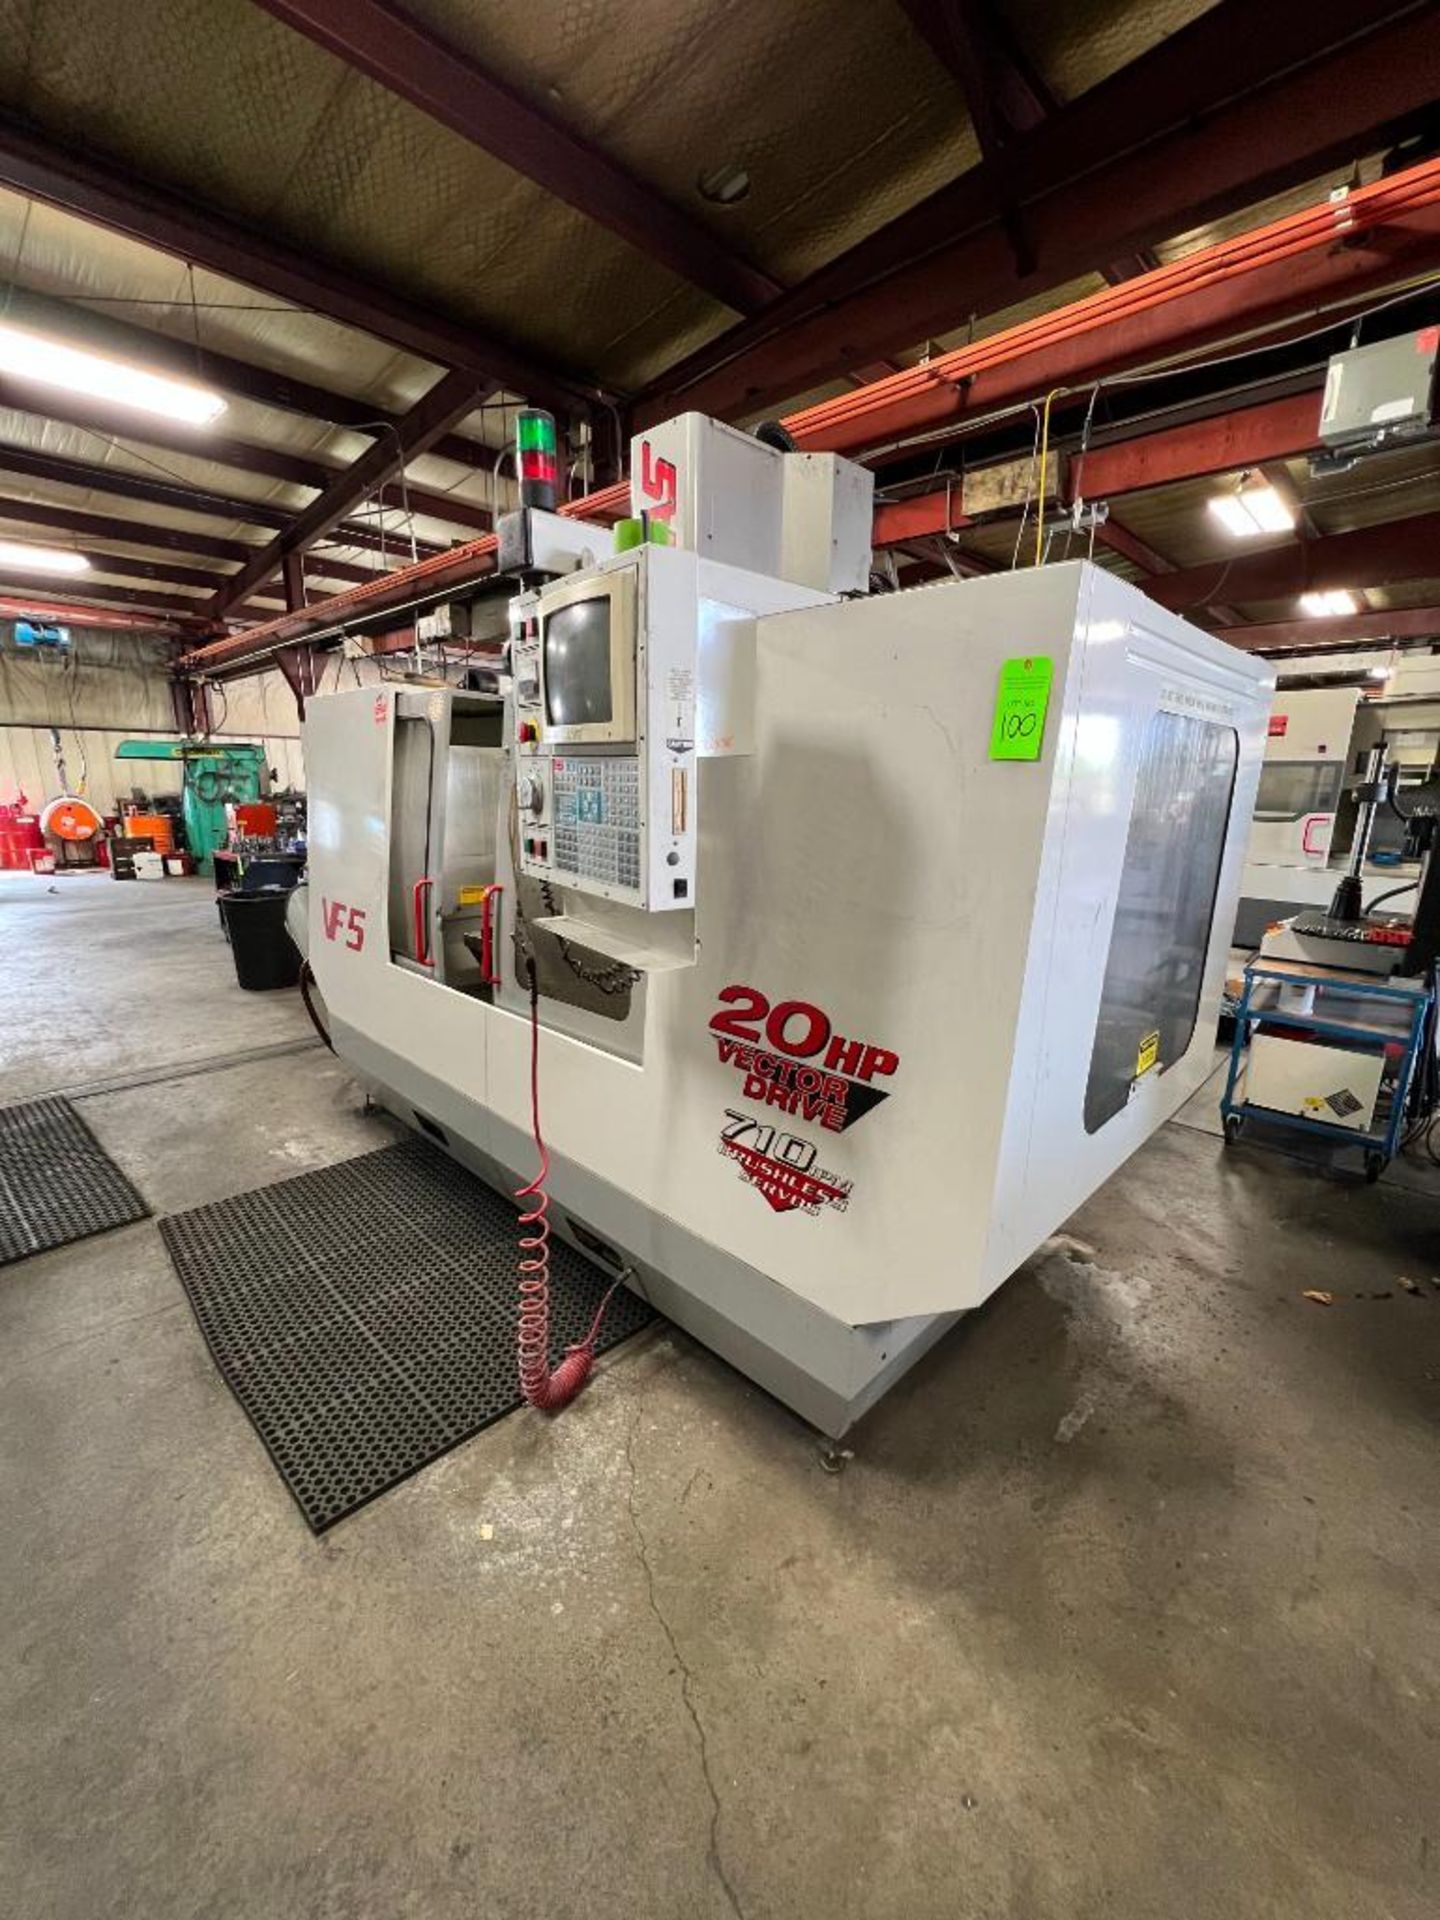 1999 Haas VF-5 3-Axis CNC Vertical Machining Center - Image 10 of 11